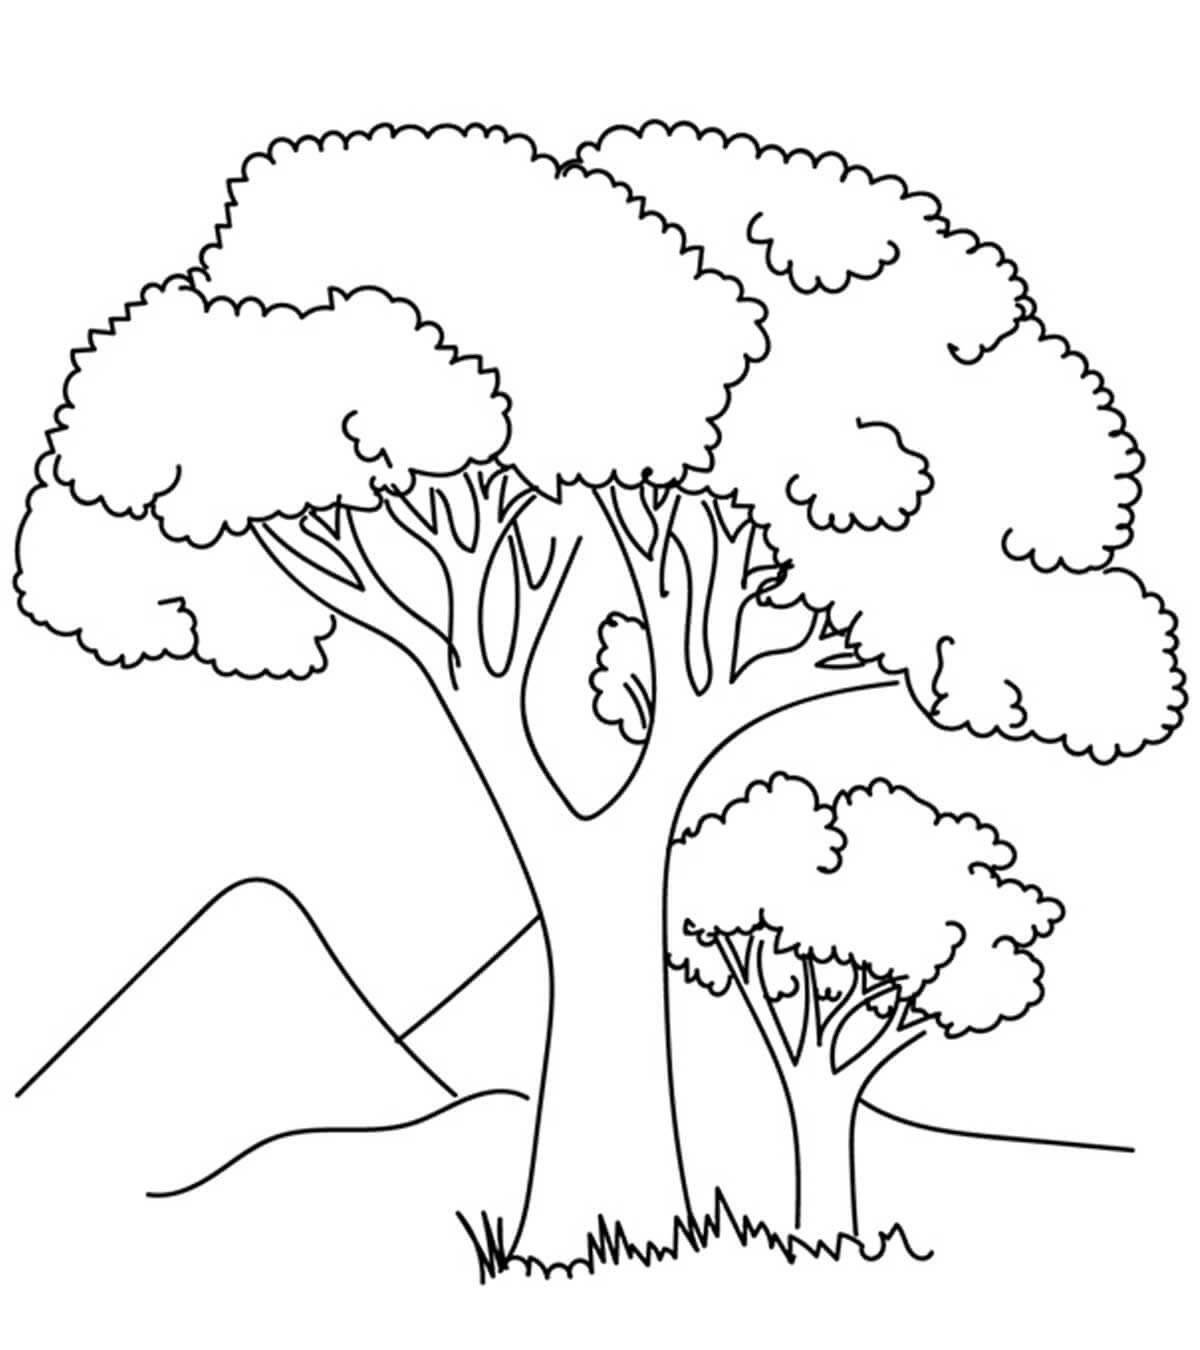 Exquisite tree coloring book for 4-5 year olds